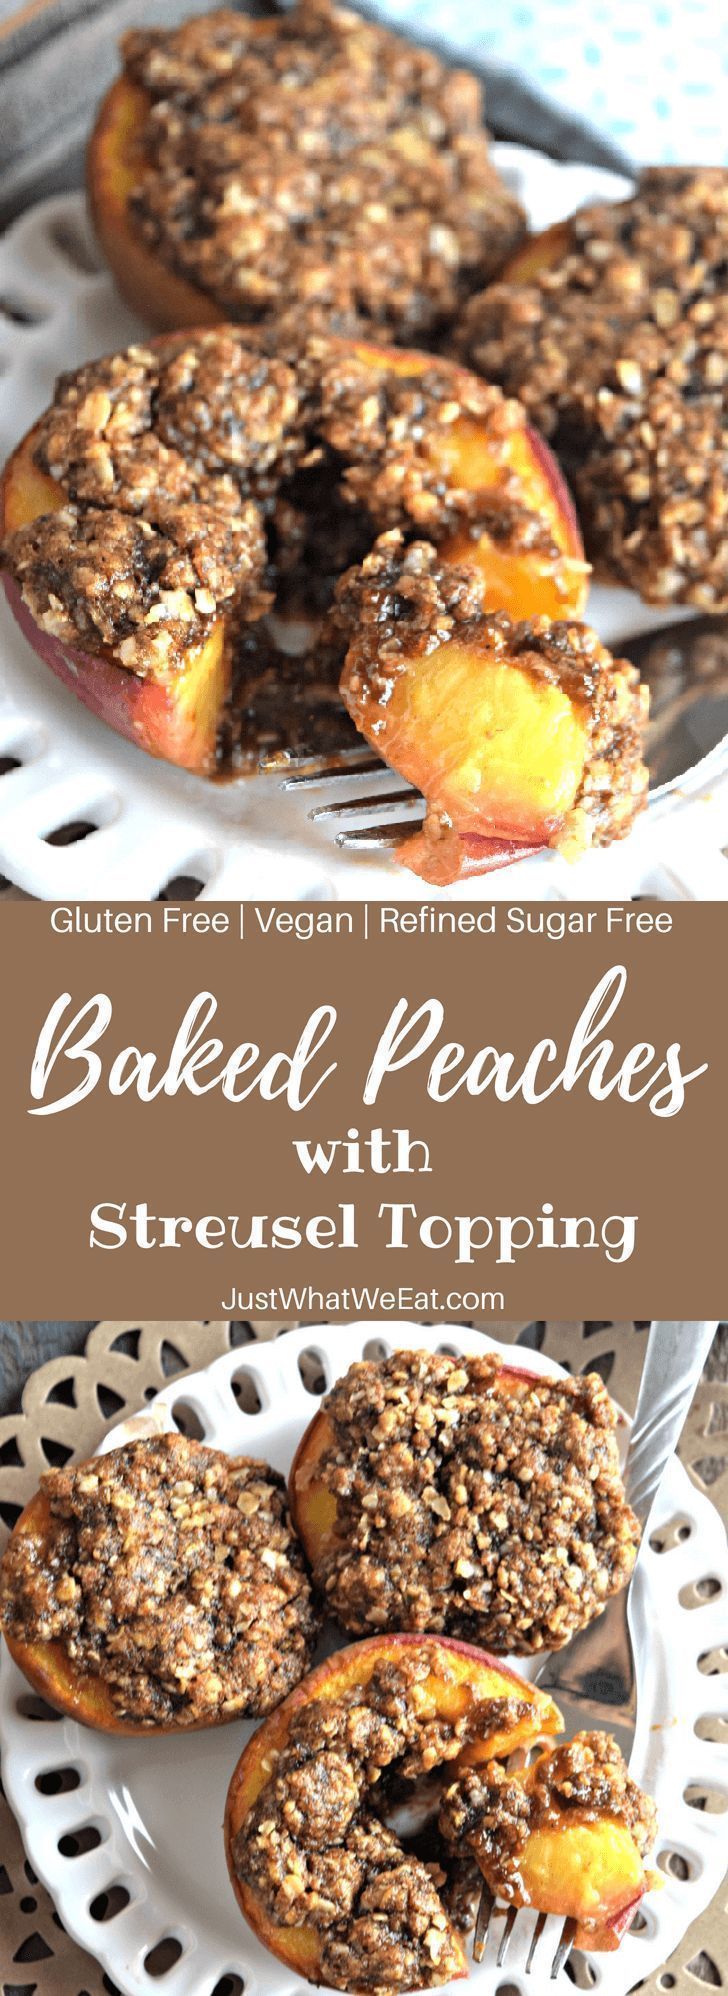 Baked Peaches with Streusel Topping - Gluten Free, Vegan, & Refined Sugar Free -   9 desserts Amazing sugar ideas